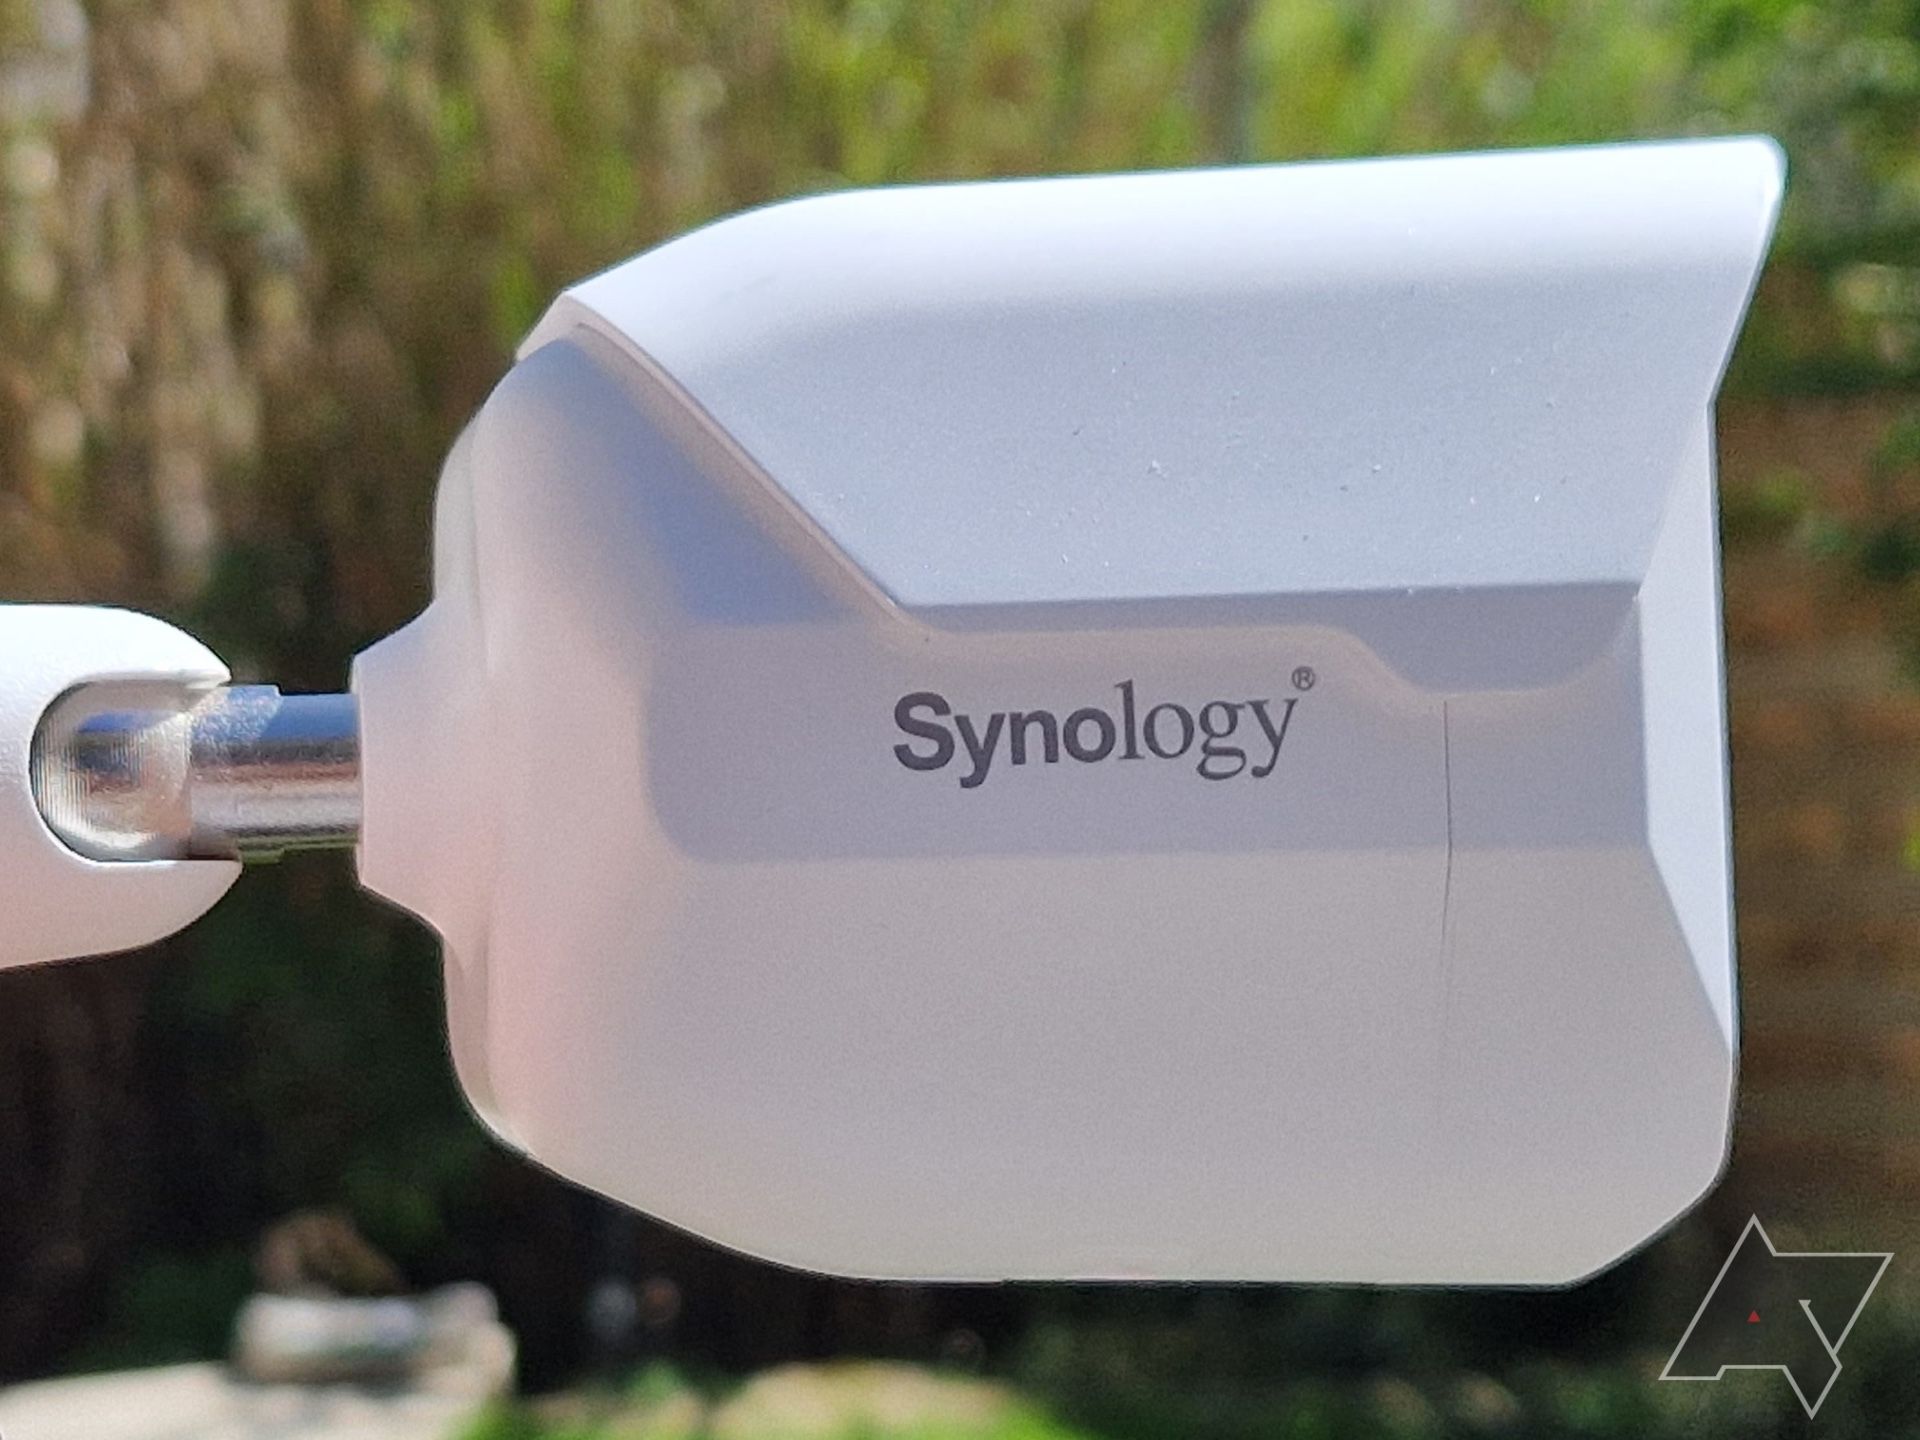 Synology BC500 camera with trees in the background